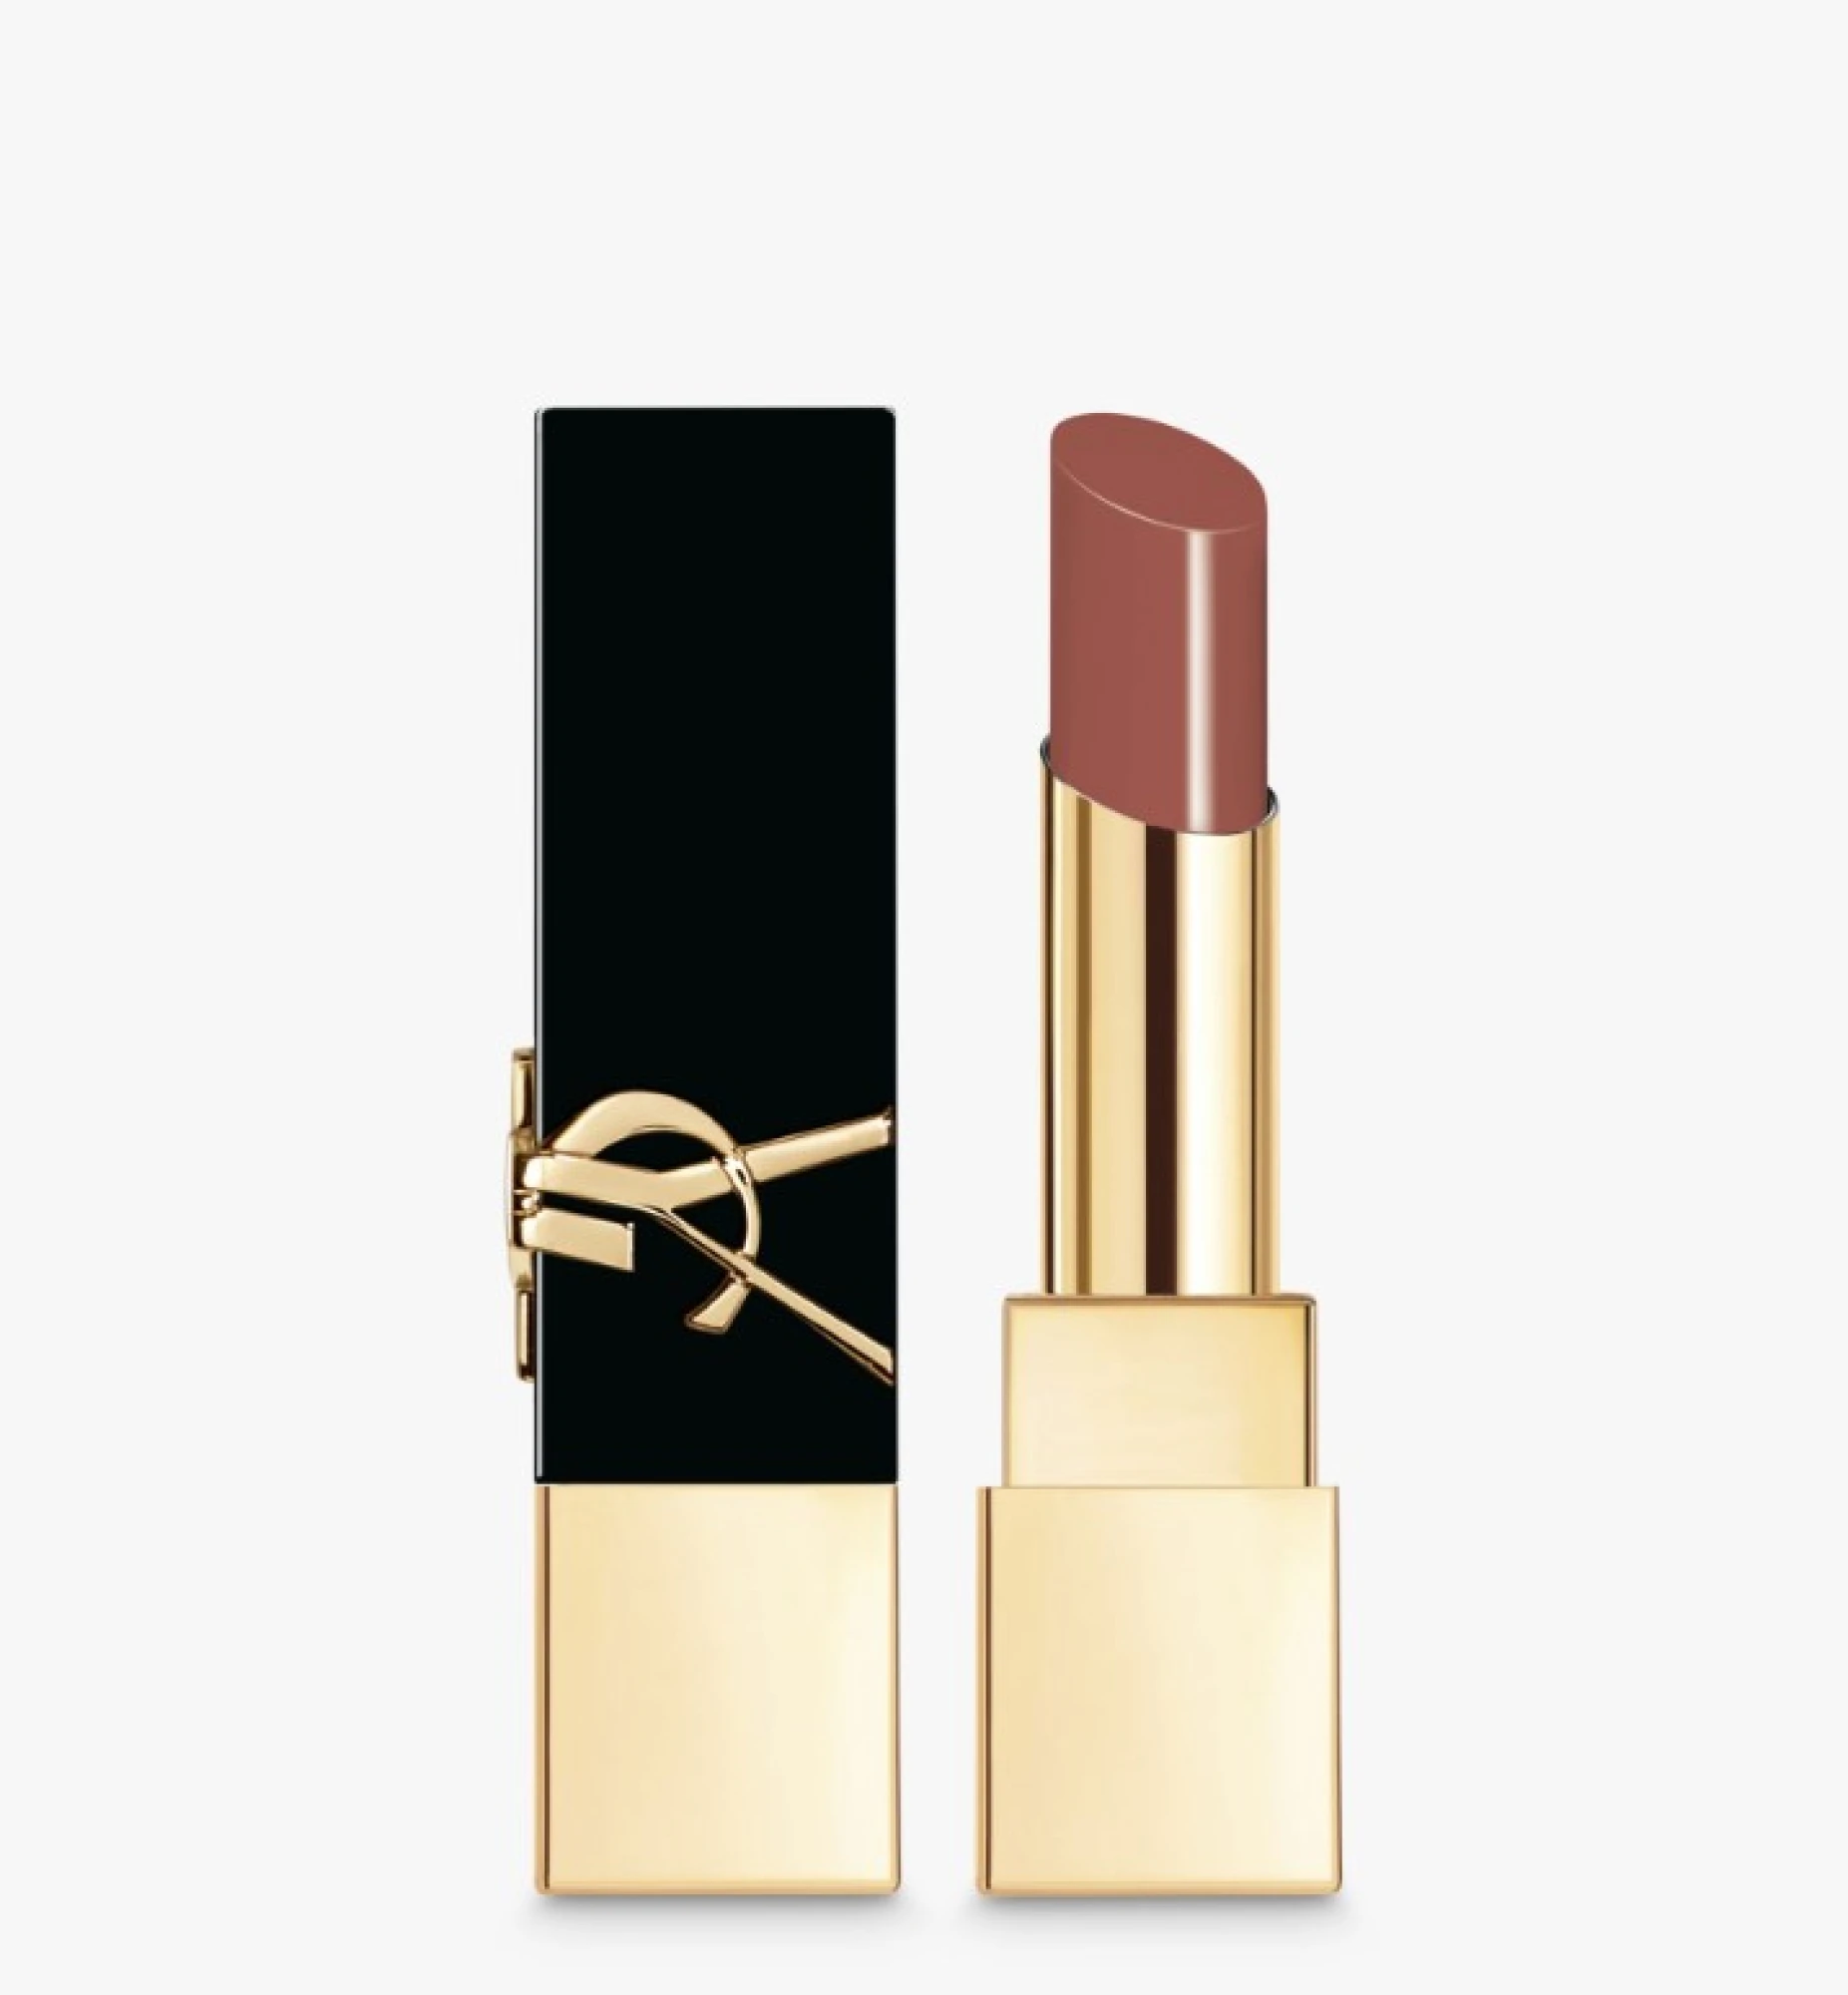 YSL LABIAL RPC THE BOLD 1968 n/a 